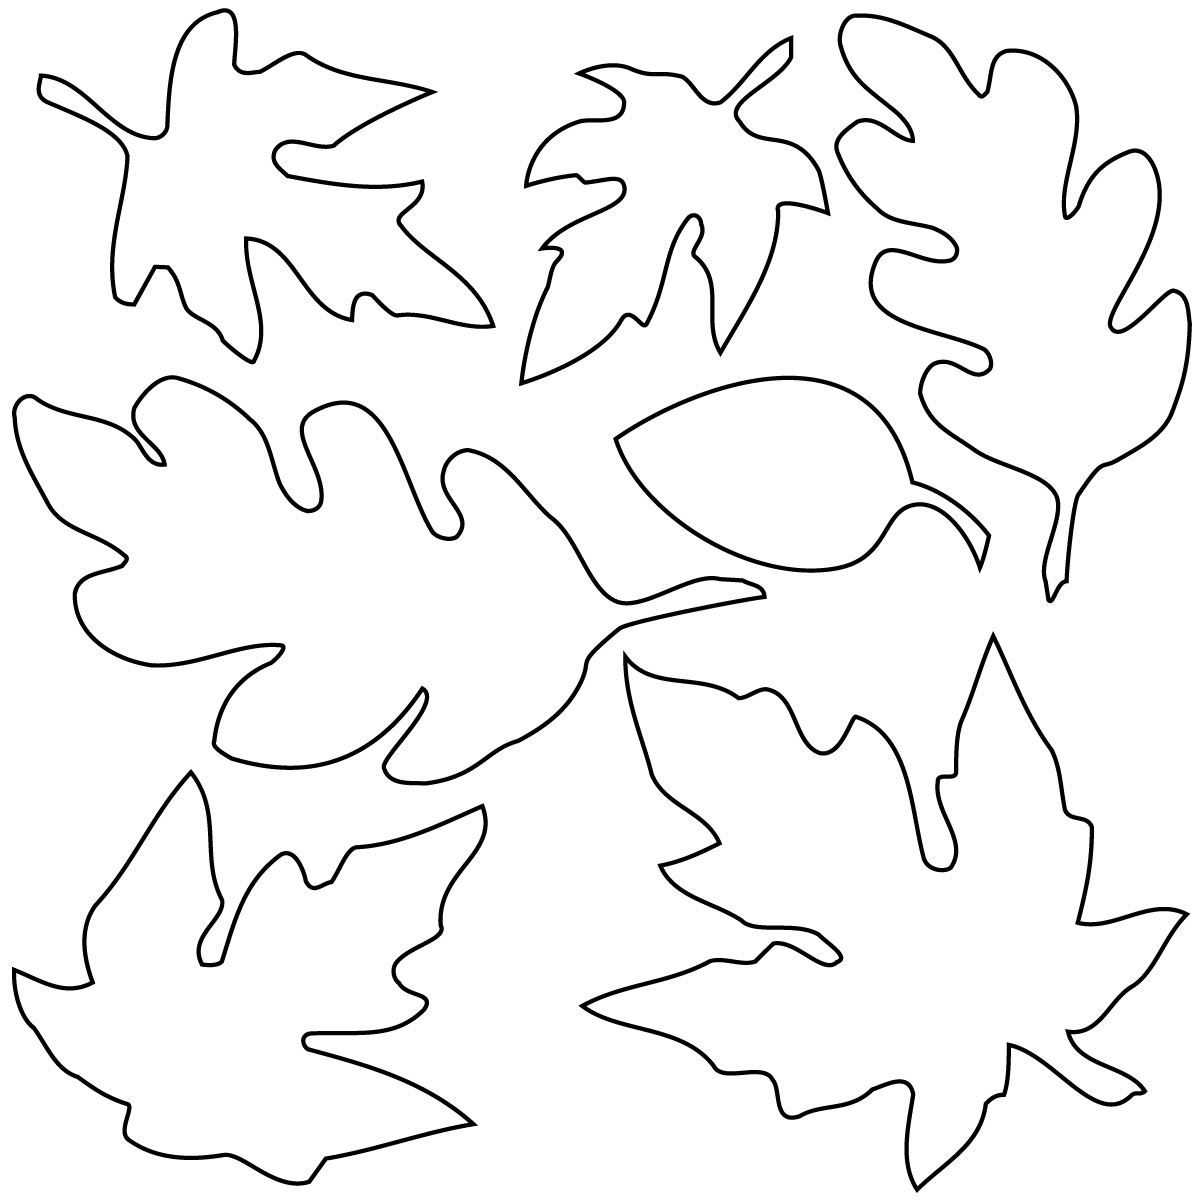 Leaf  black and white clip art fall leaves black and white clipartfest